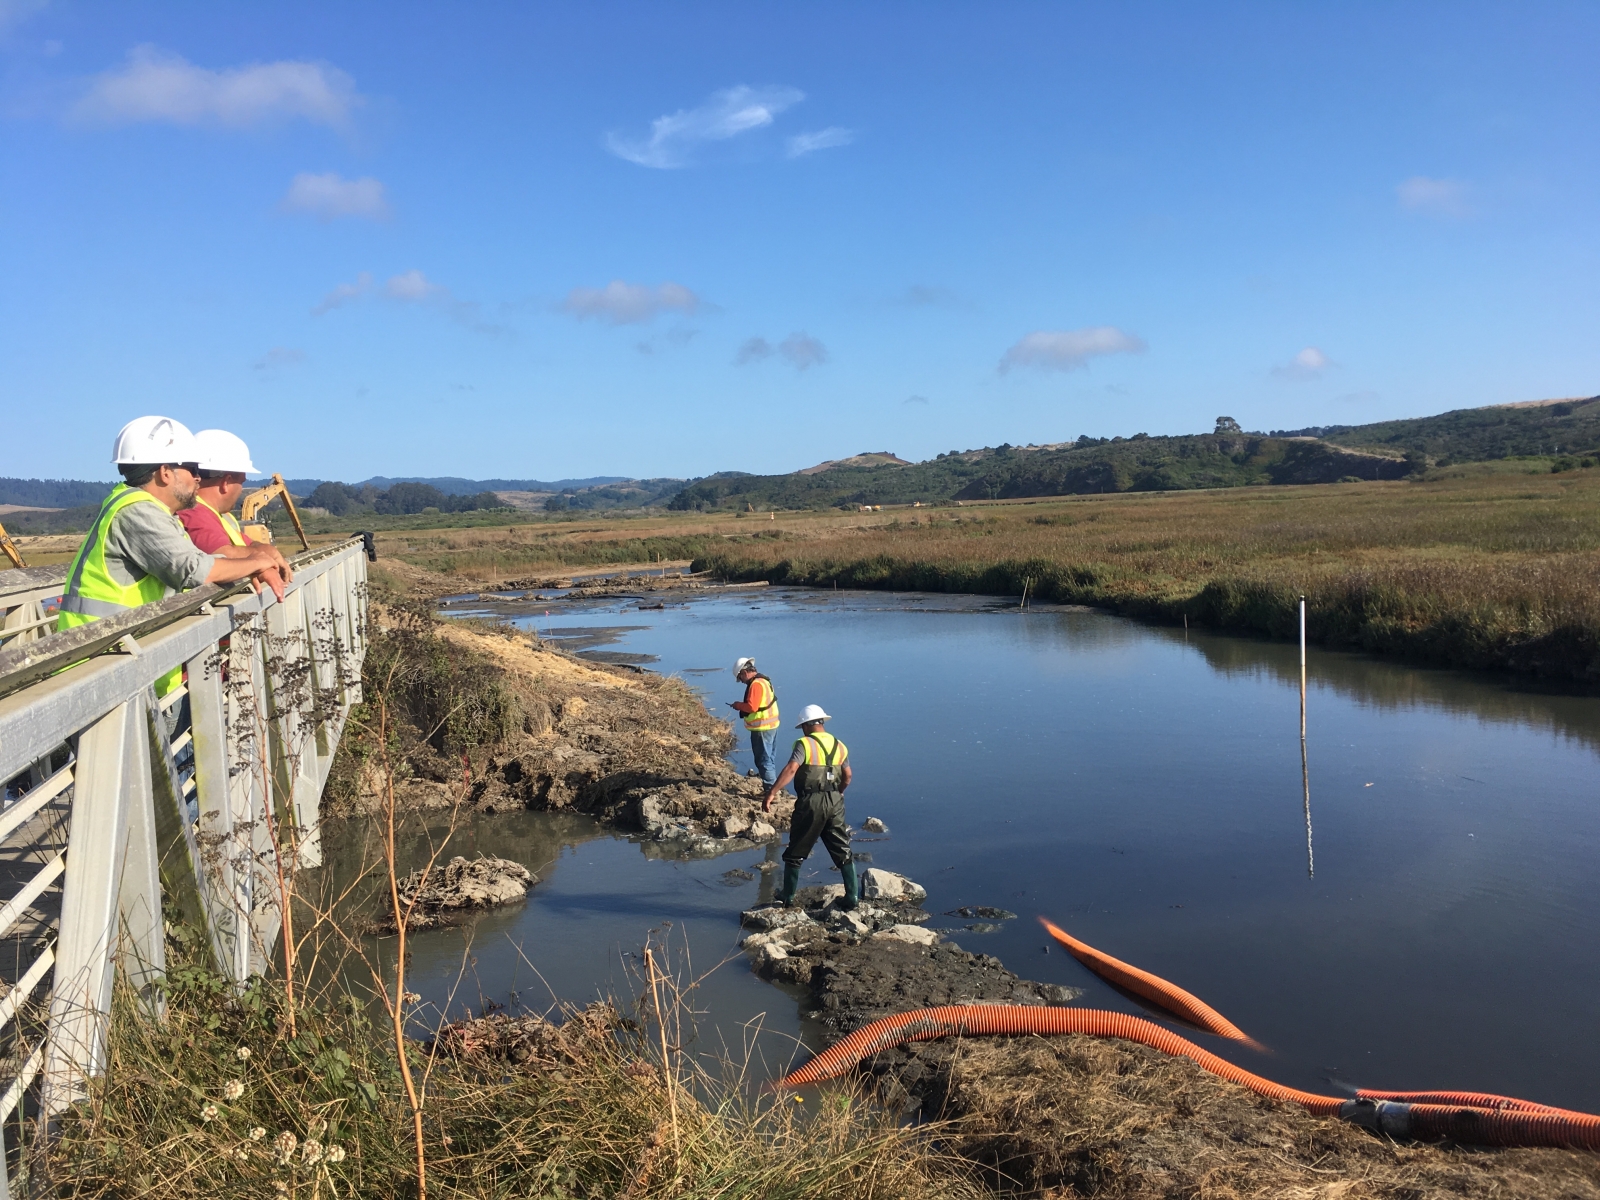 Work on Marsh constrol Structure, August 2019